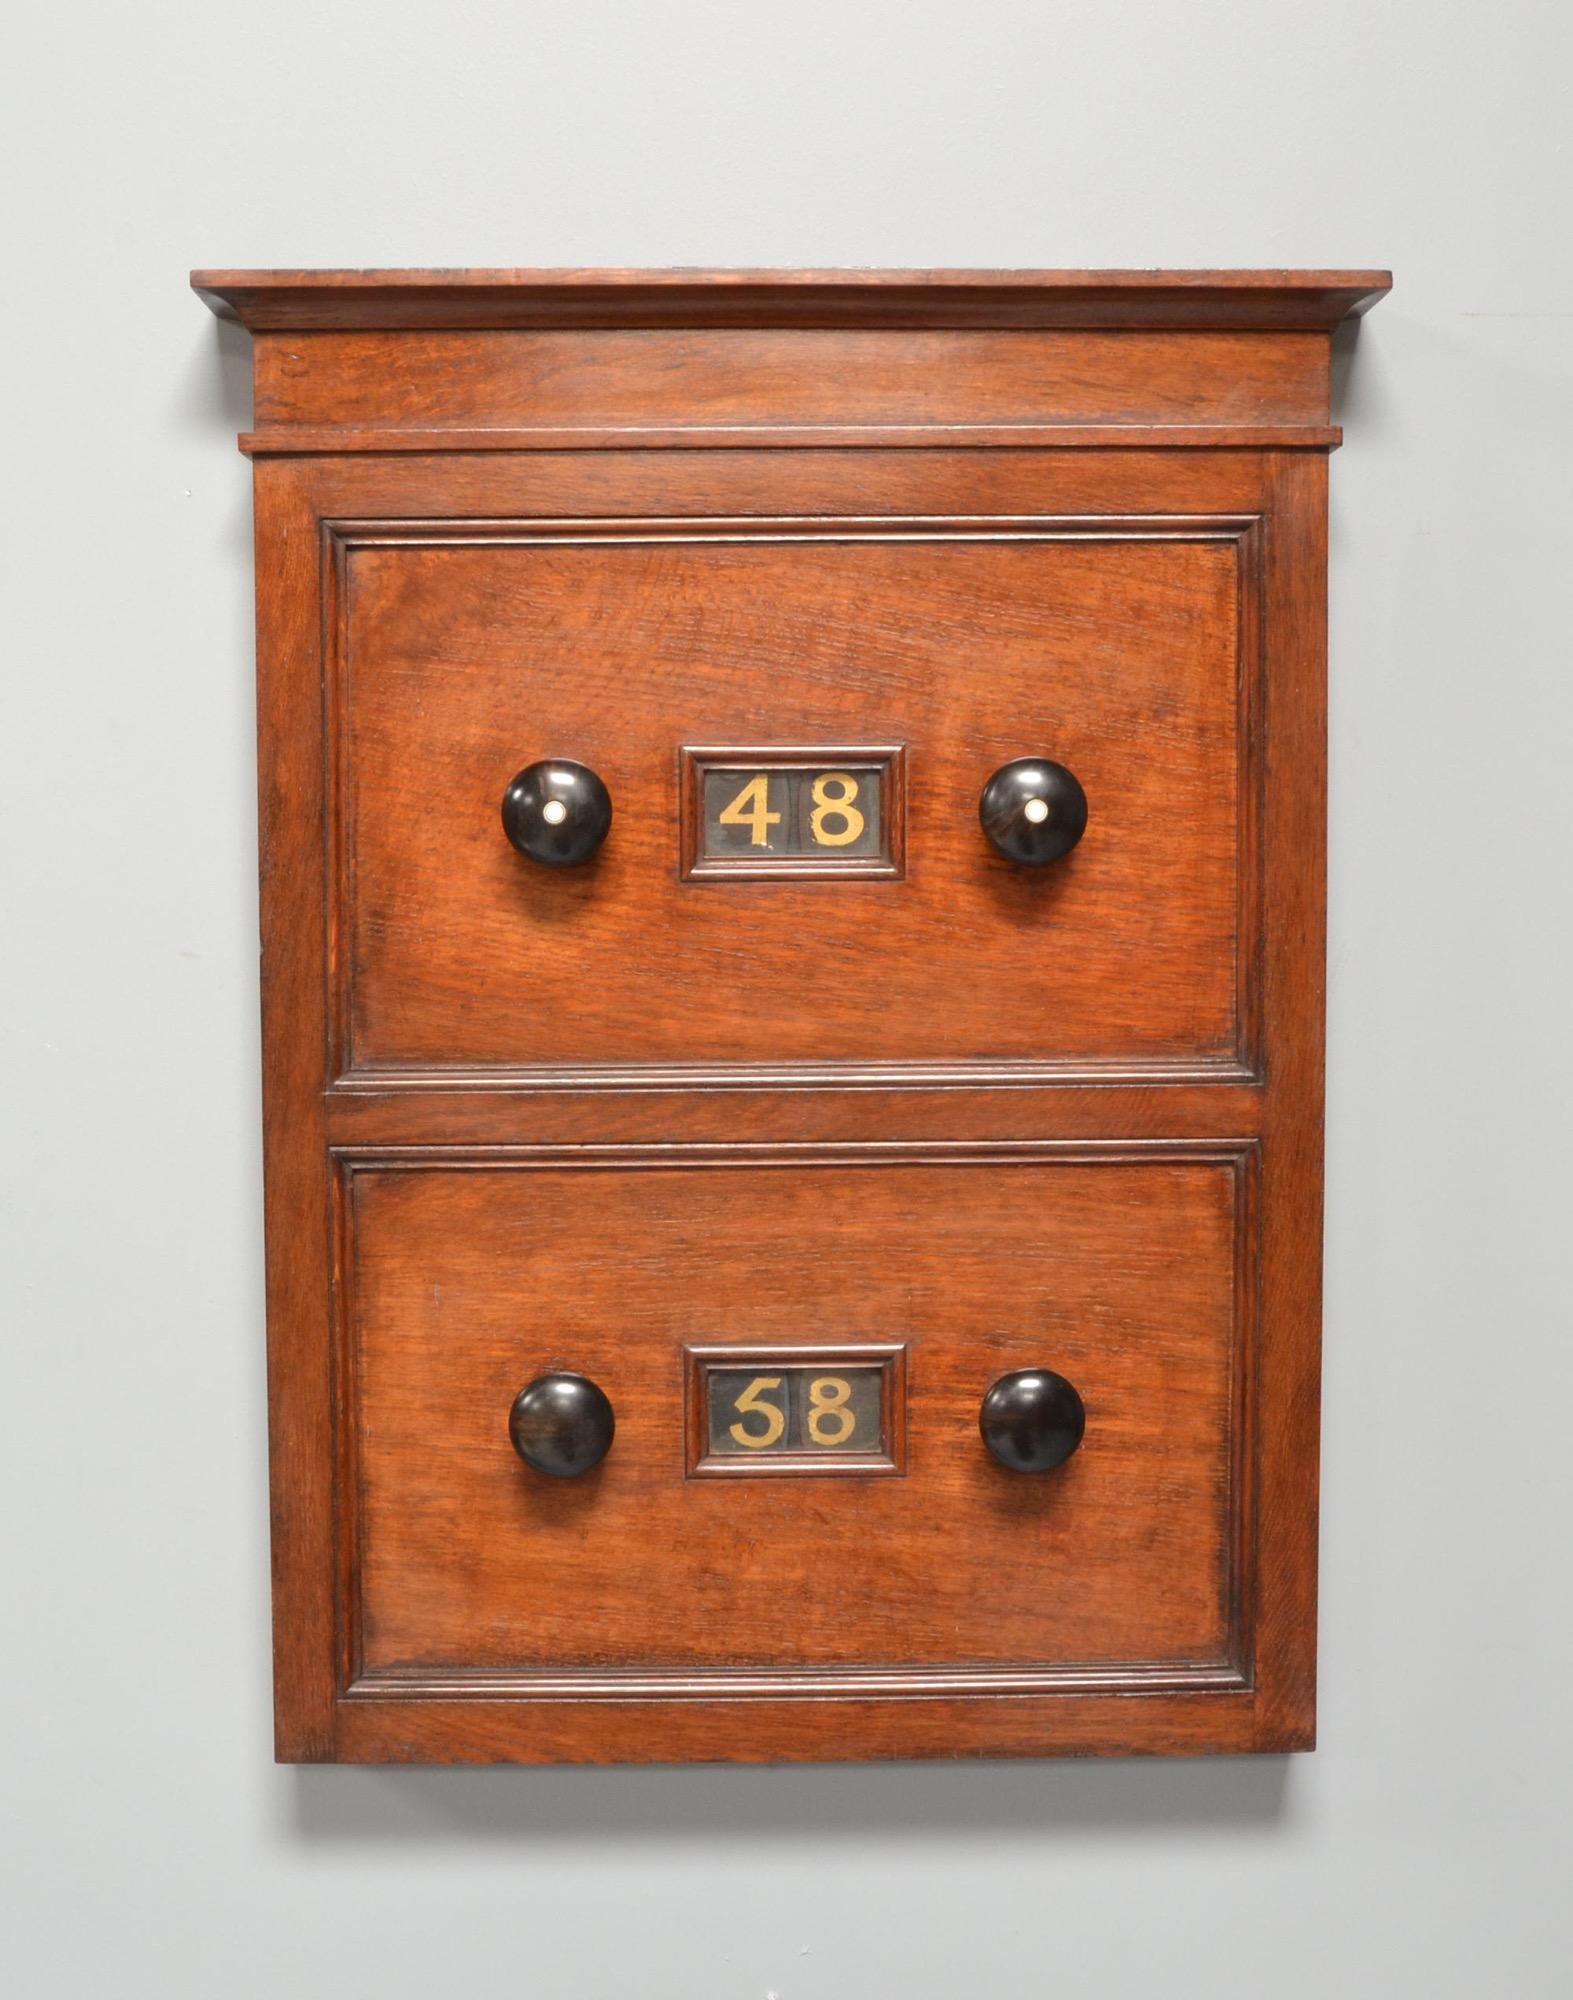 Clock Face Numerical Billiards Scorer Oak Cabinet with Rotating Dials In Good Condition For Sale In Radstock, GB